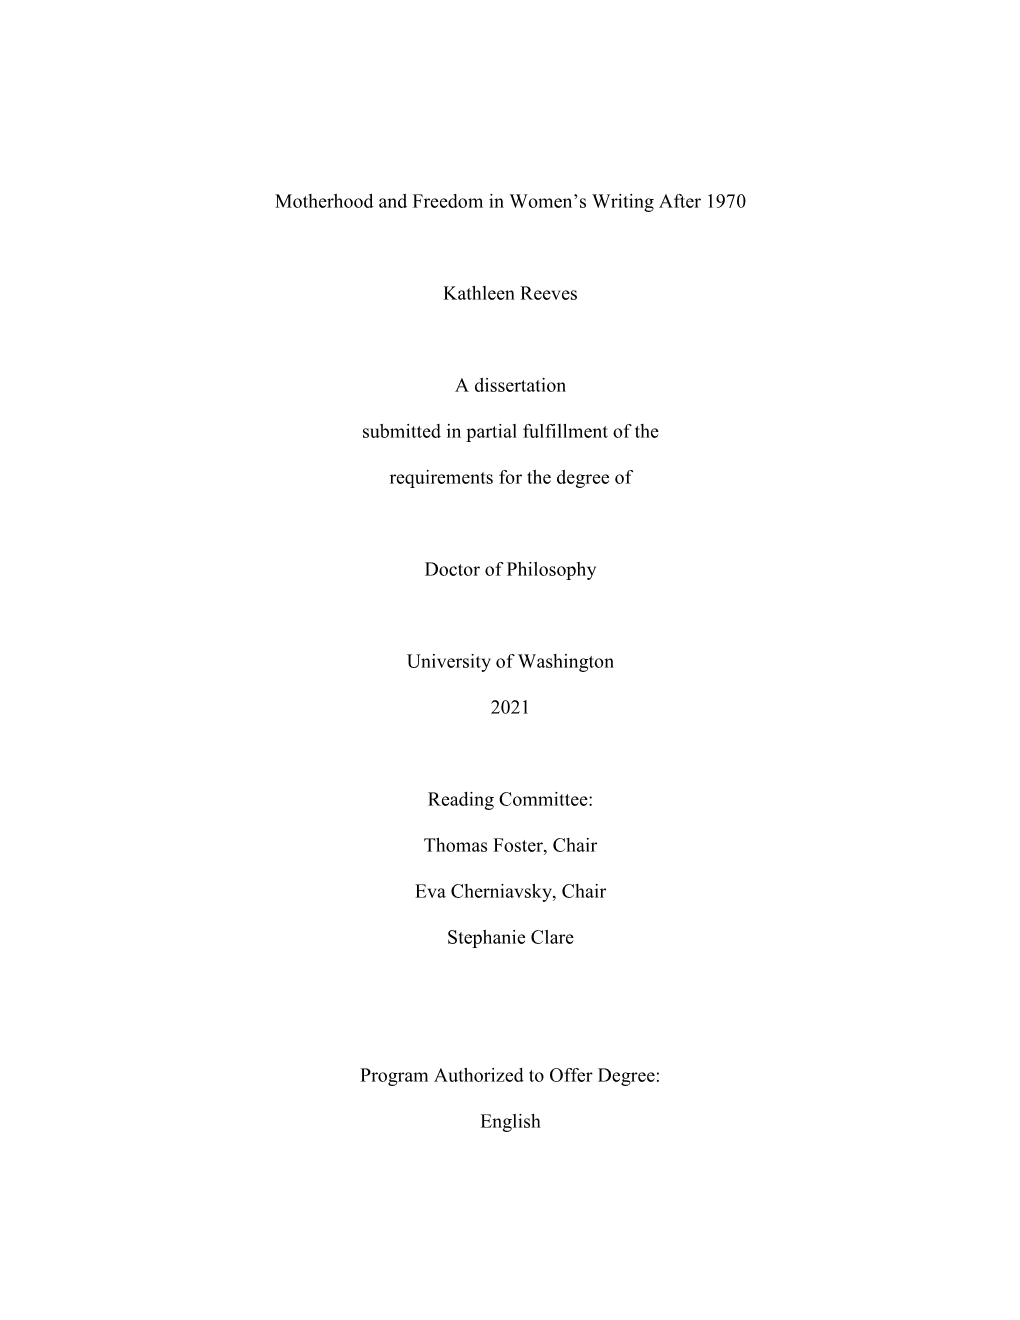 Motherhood and Freedom in Women's Writing After 1970 Kathleen Reeves a Dissertation Submitted in Partial Fulfillment of the Re